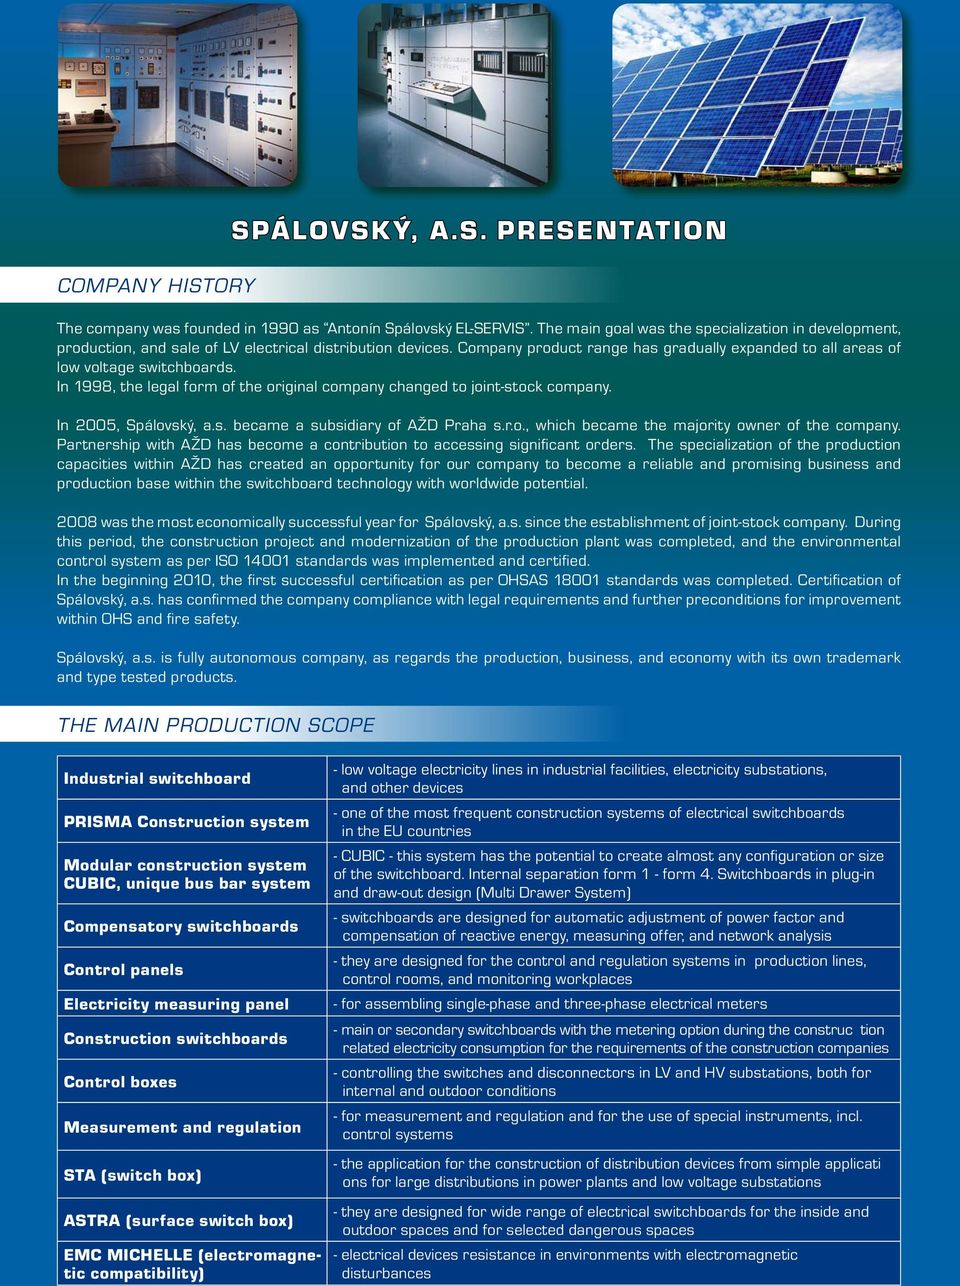 In 1998, the legal form of the original company changed to joint-stock company. In 2005, Spálovský, a.s. became a subsidiary of AŽD Praha s.r.o., which became the majority owner of the company.